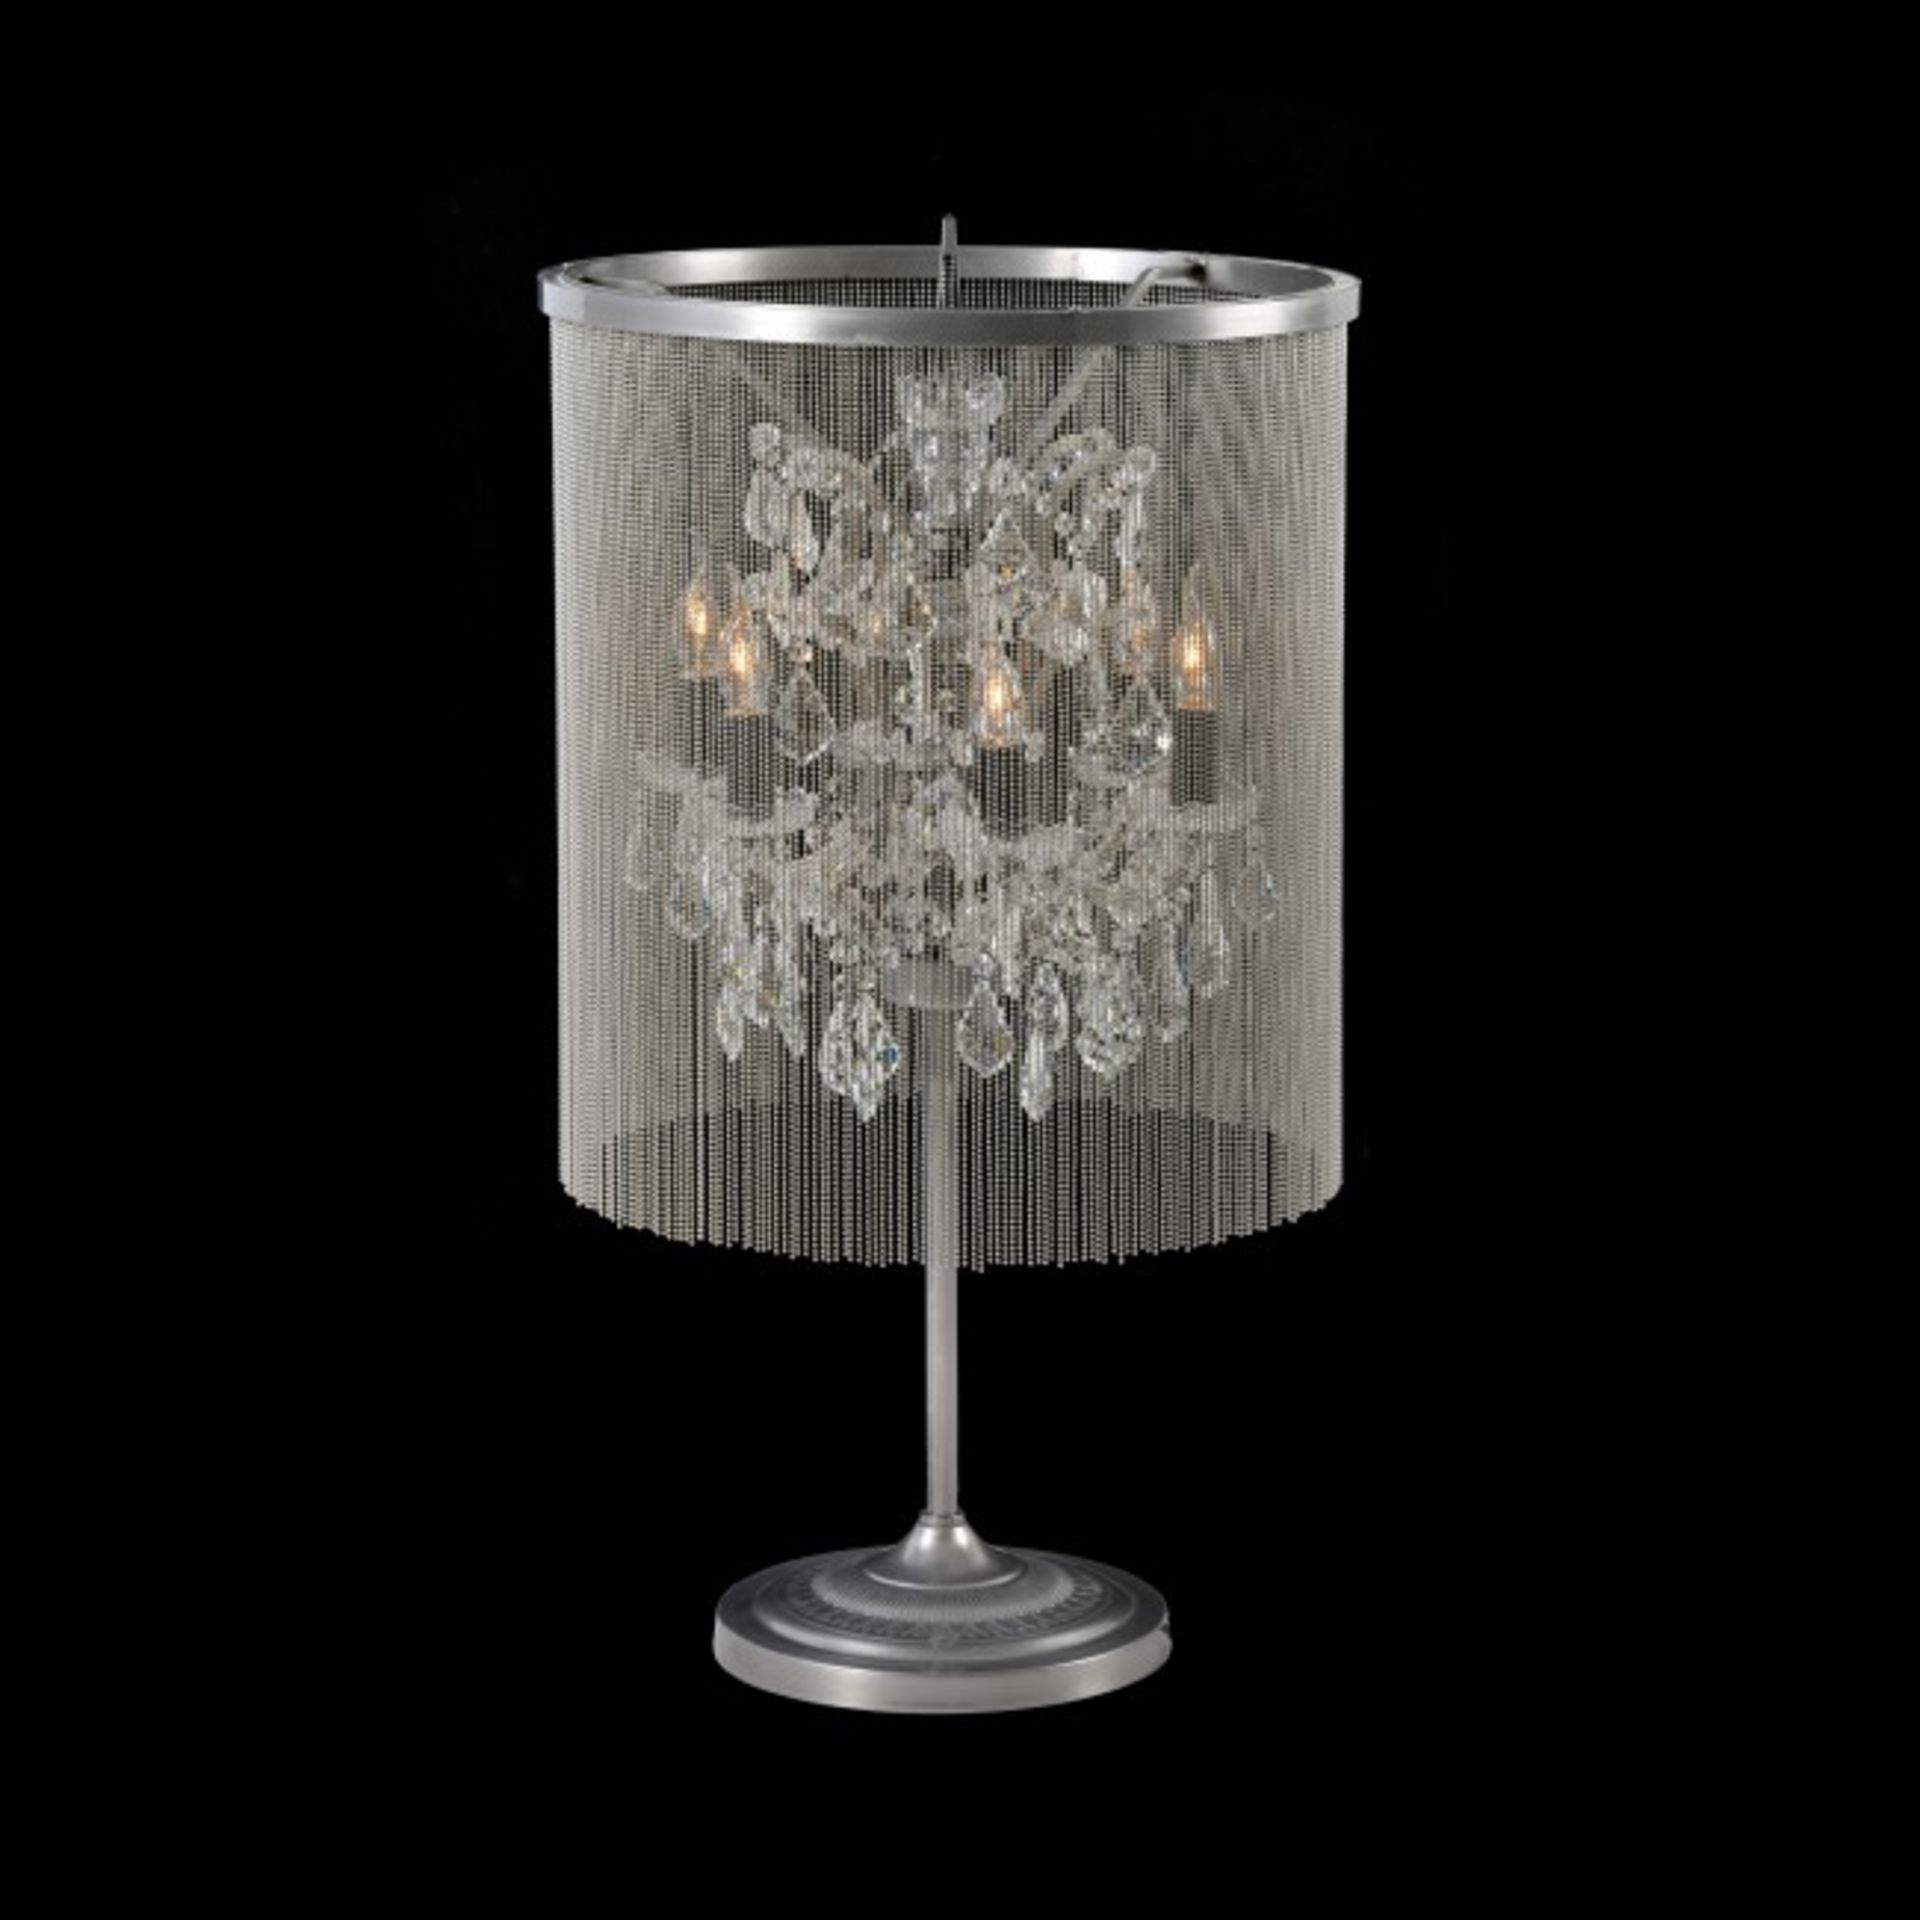 Chainmail Crystal Table Lamp Natural 52 X 52 X 82cm The Chainmail Crystal amp Is A Modernised